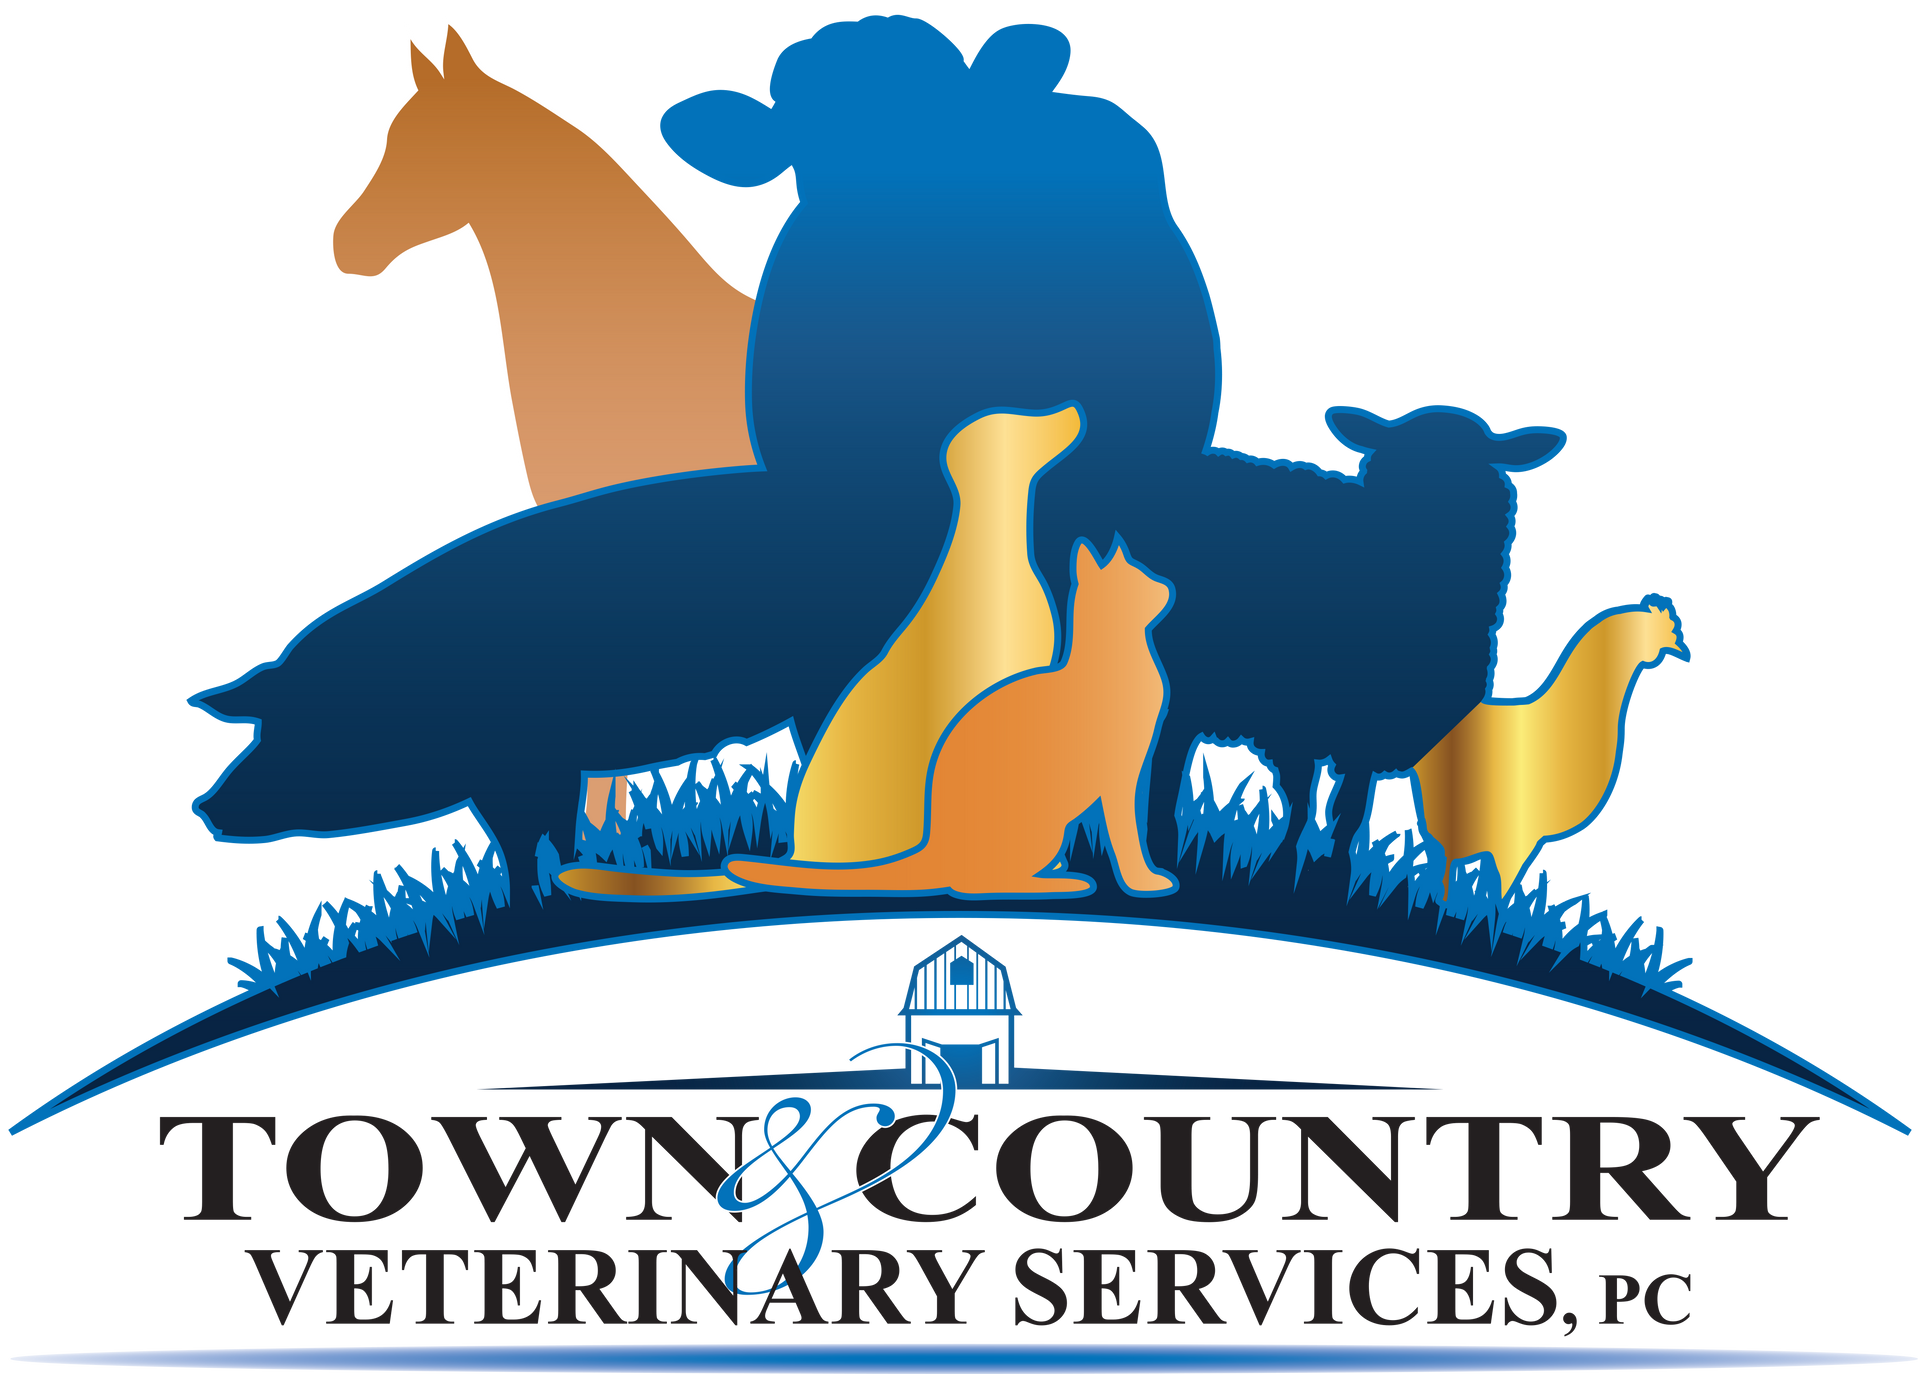 Town & Country Veterinary Services